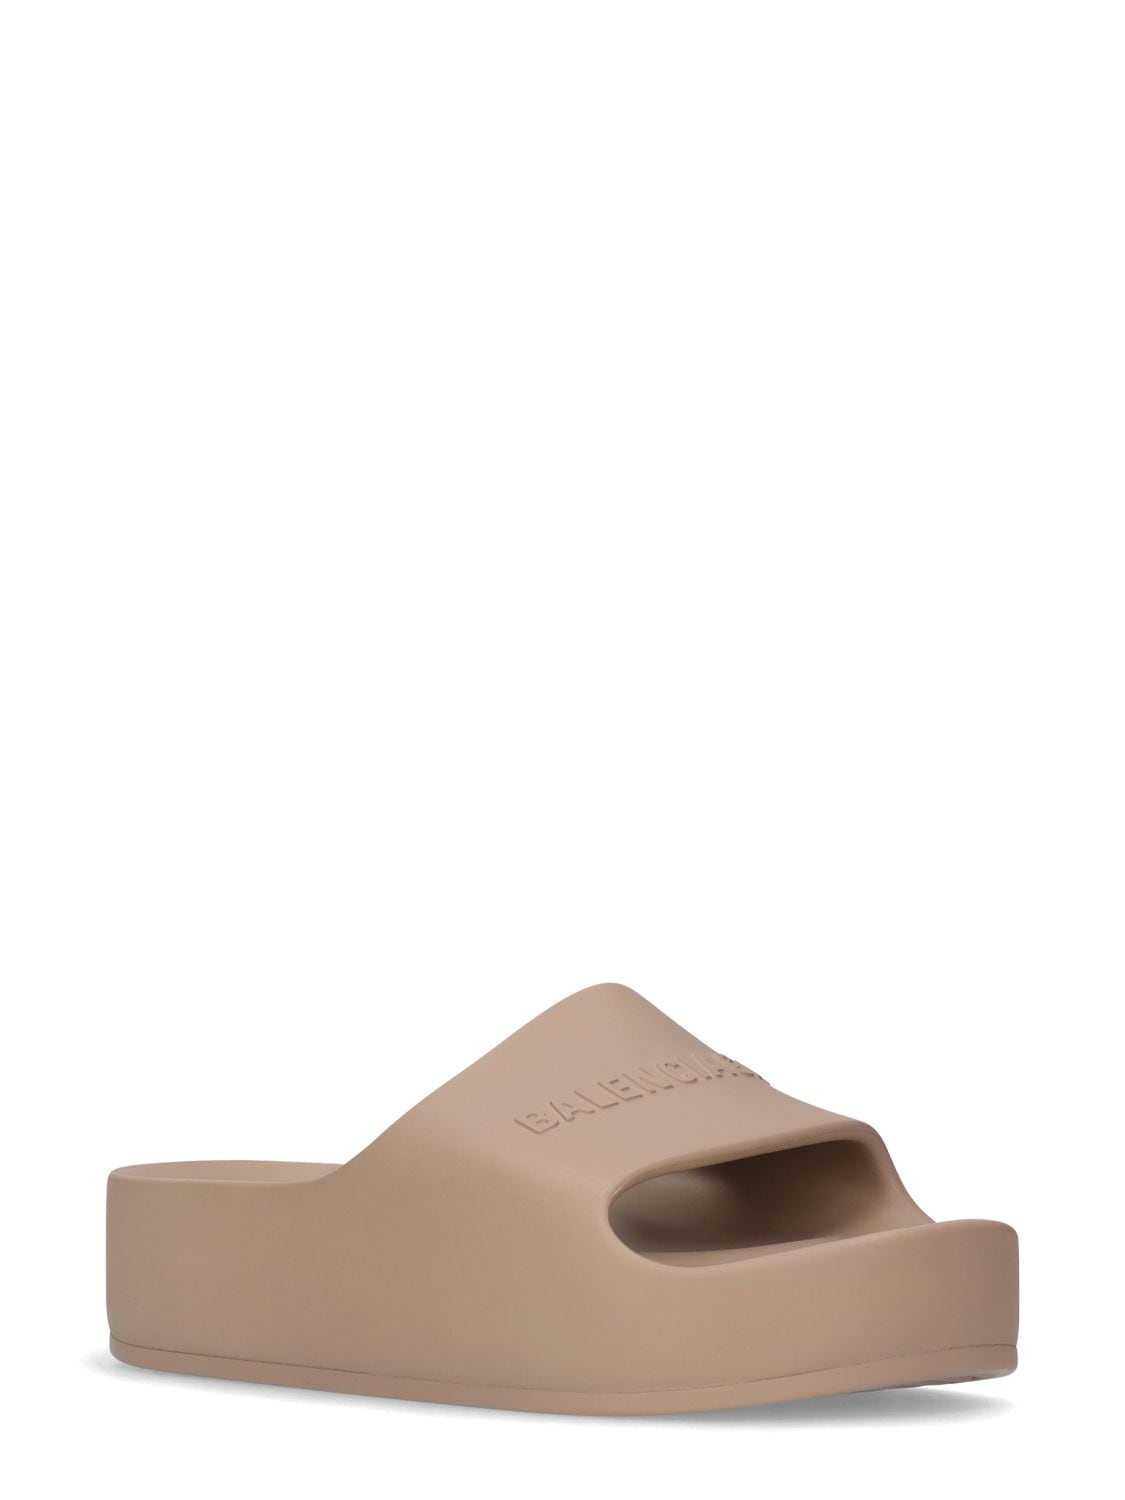 Shop Balenciaga 40mm Rubber Slide Sandals In Taupe